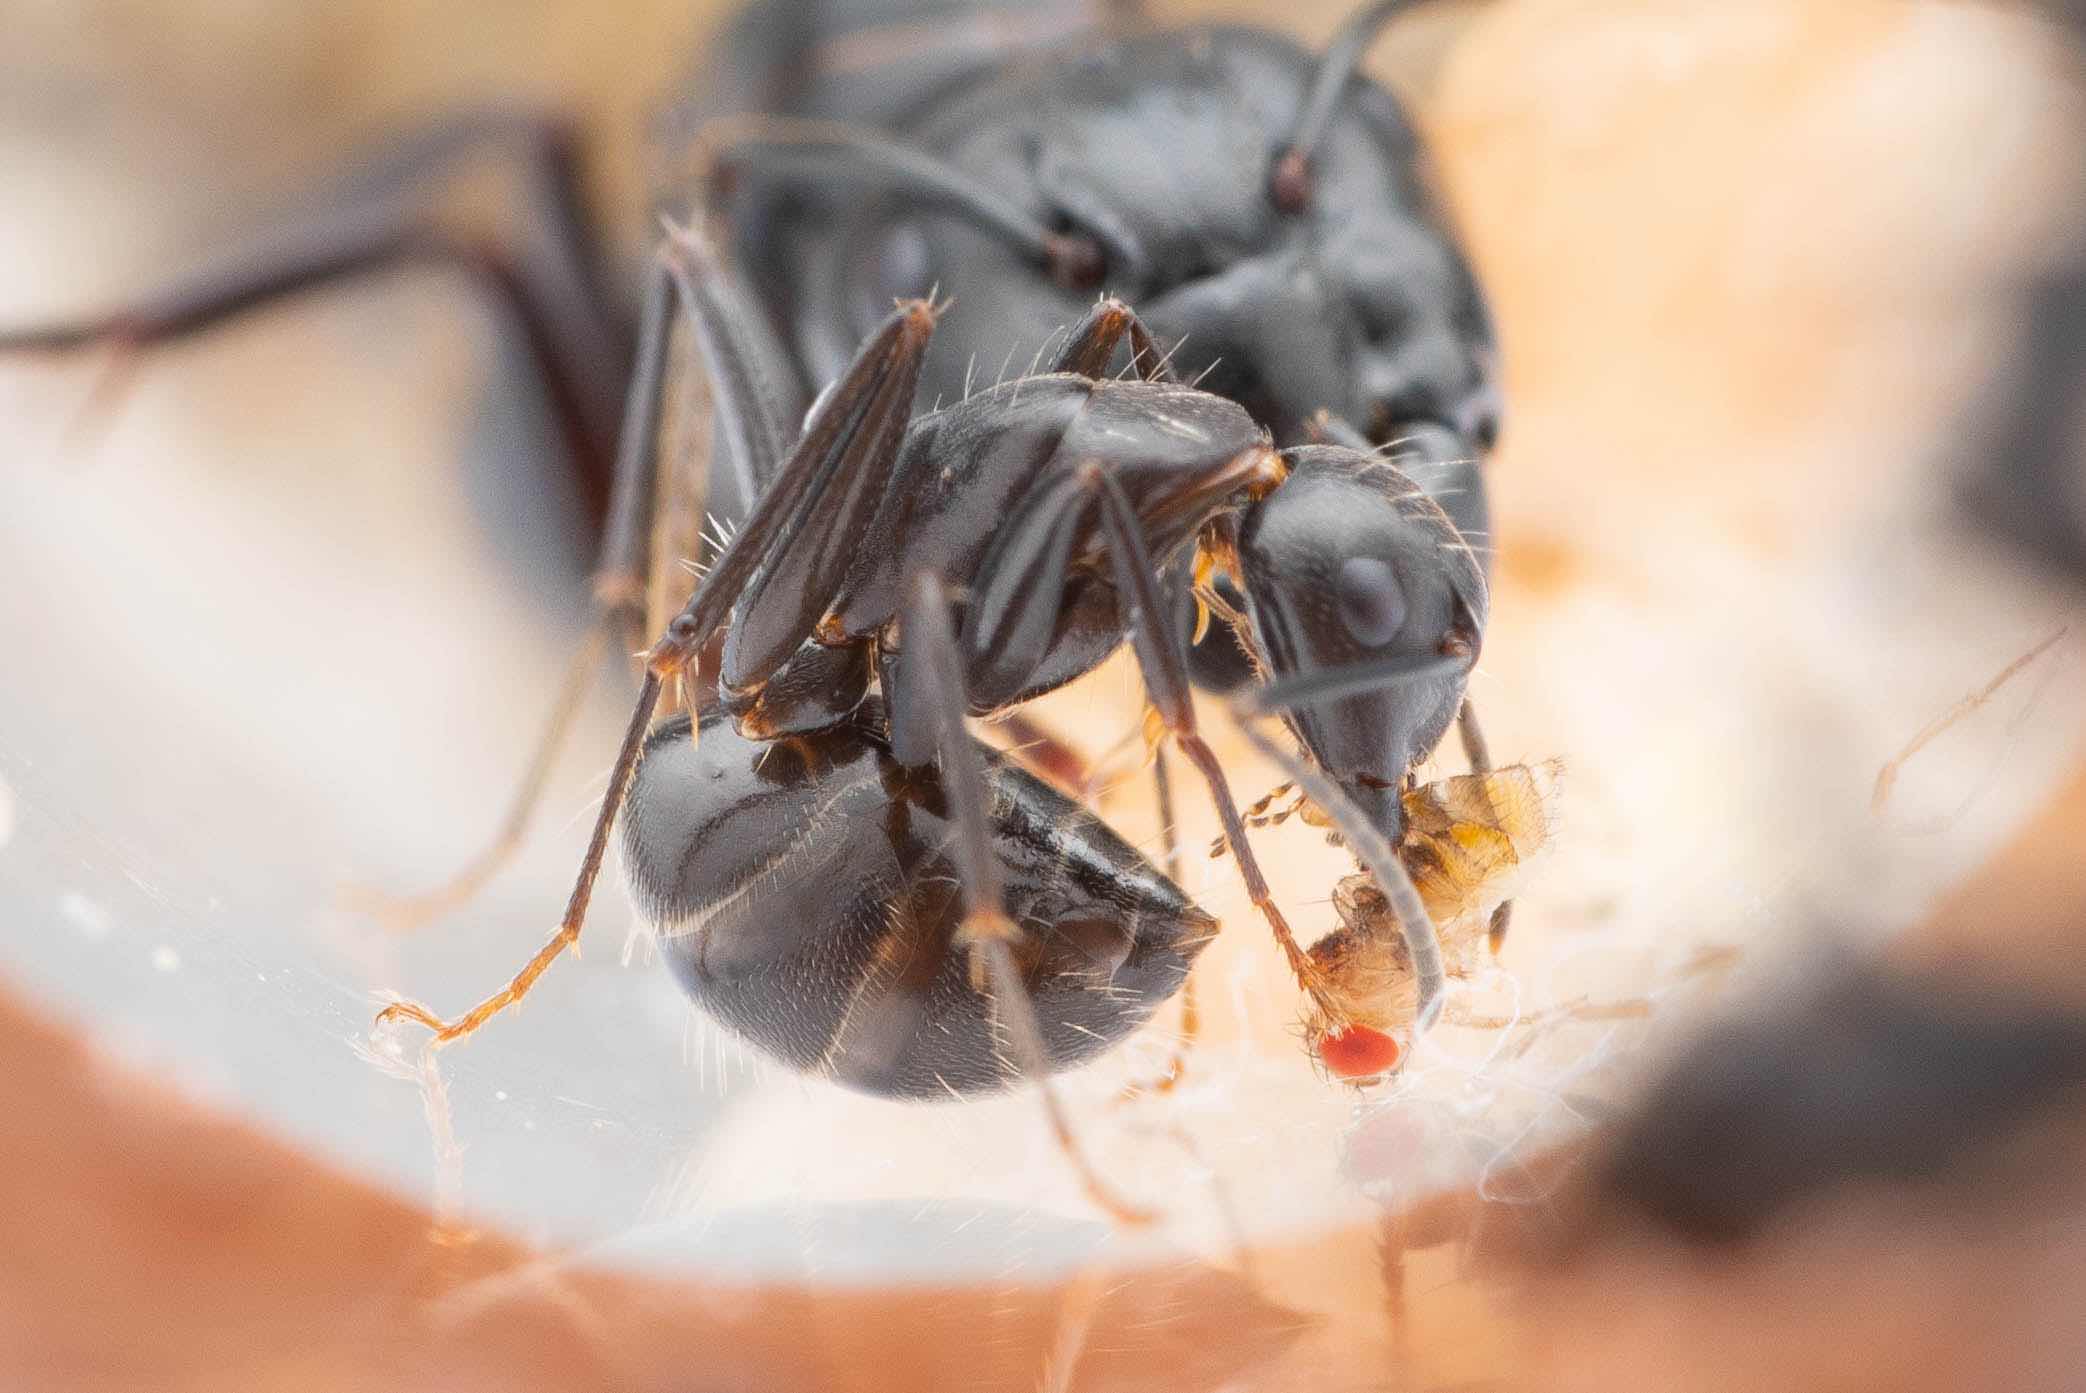 A C. pennsylvanicus worker dabs formic acid onto a fruitfly. Photo courtesy of Max Hike.